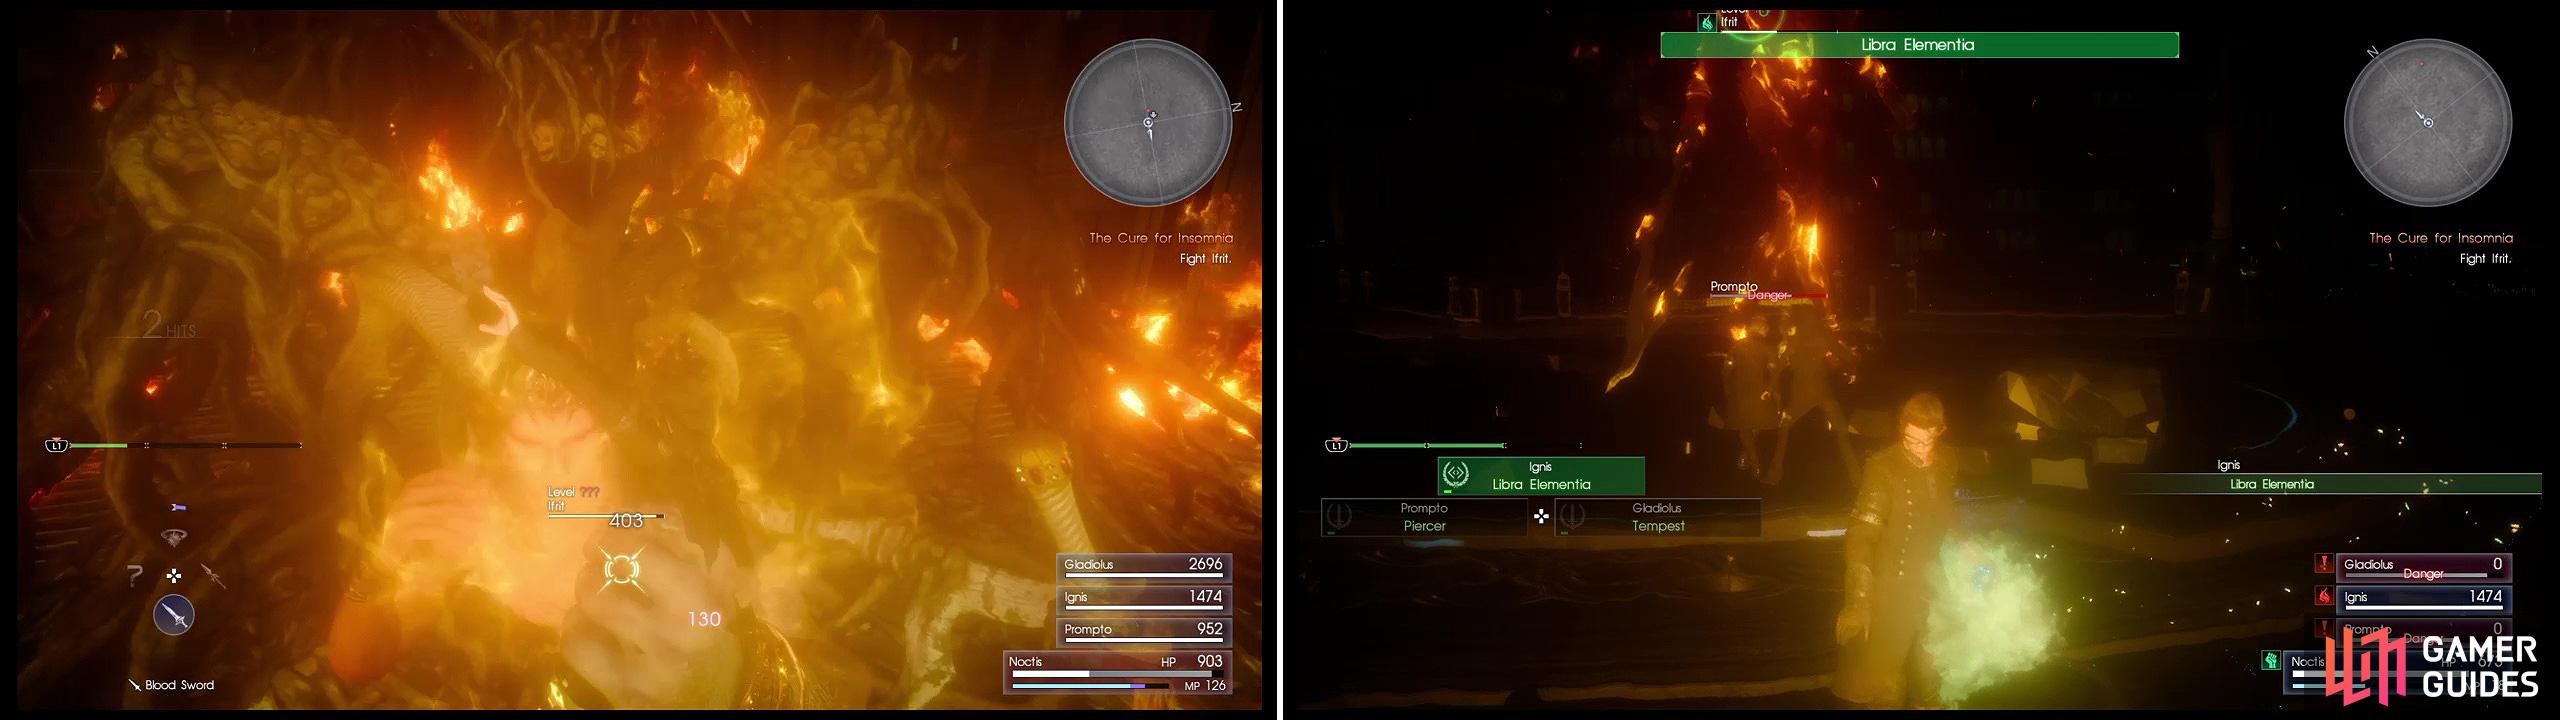 If you get too close, Ifrit can grab you for a lot of damage (left). The best way of dealing with him is Ice magic (right) so make use of Ignis.